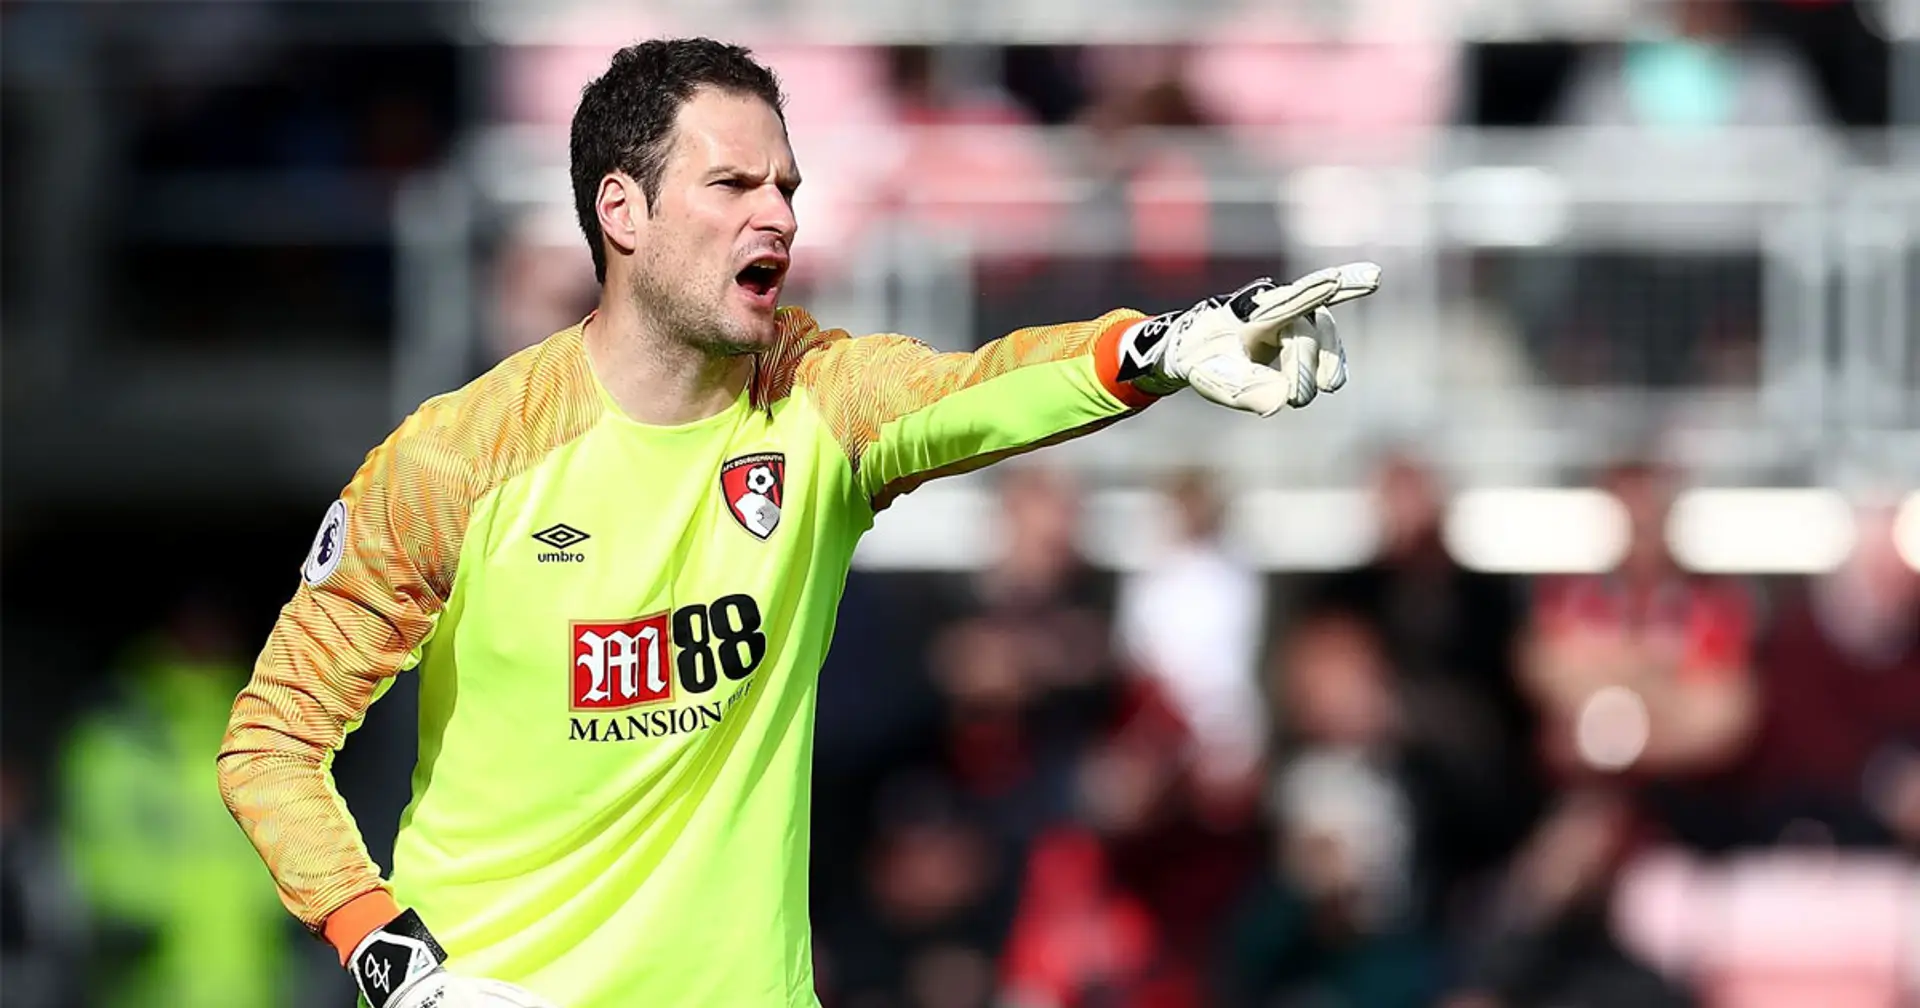 'It's like a movie scene': Ex-Chelsea keeper Asmir Begovic offers first-hand insight into devastating impact of coronavirus in Italy